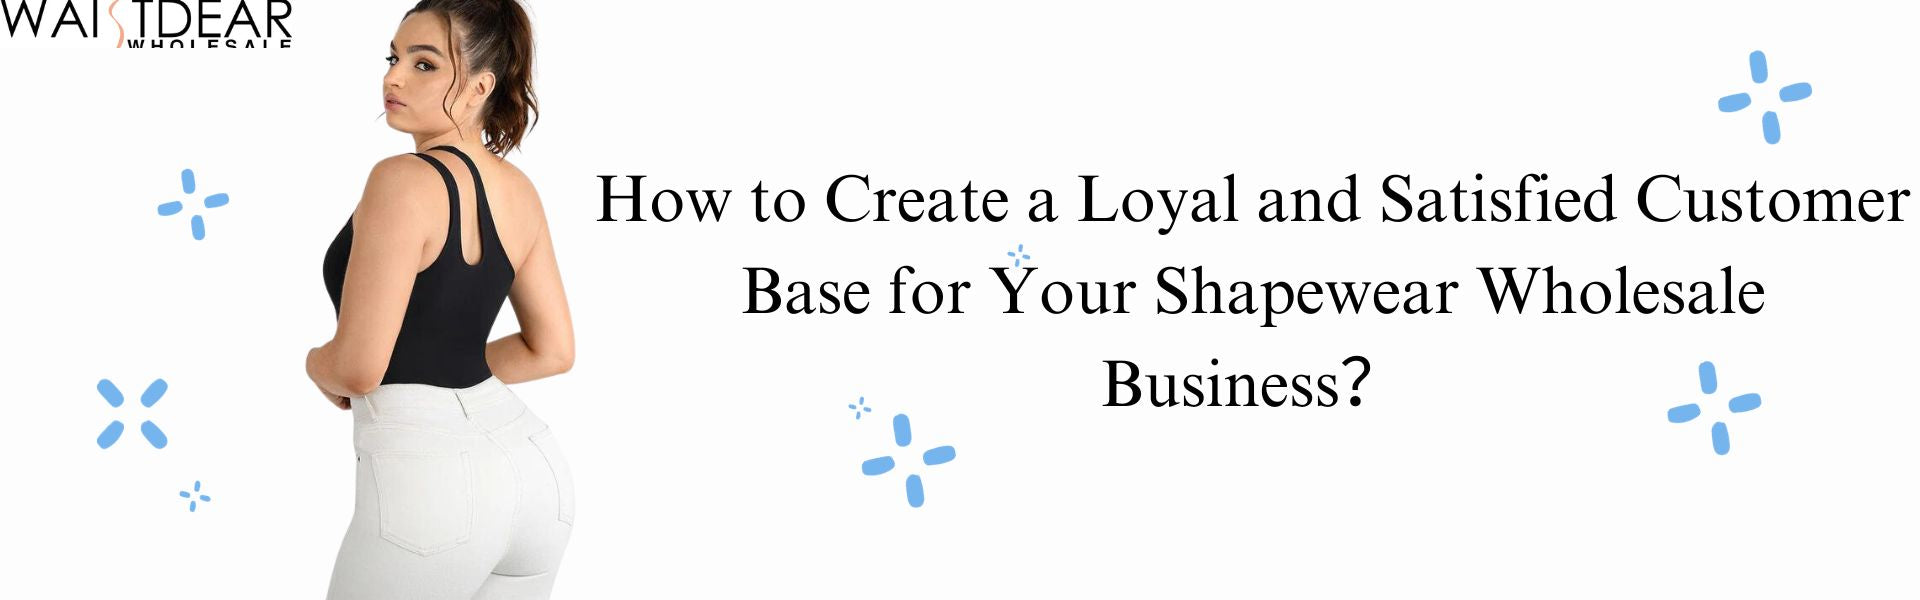 How to Create a Loyal and Satisfied Customer Base for Your Shapewear Wholesale Business？